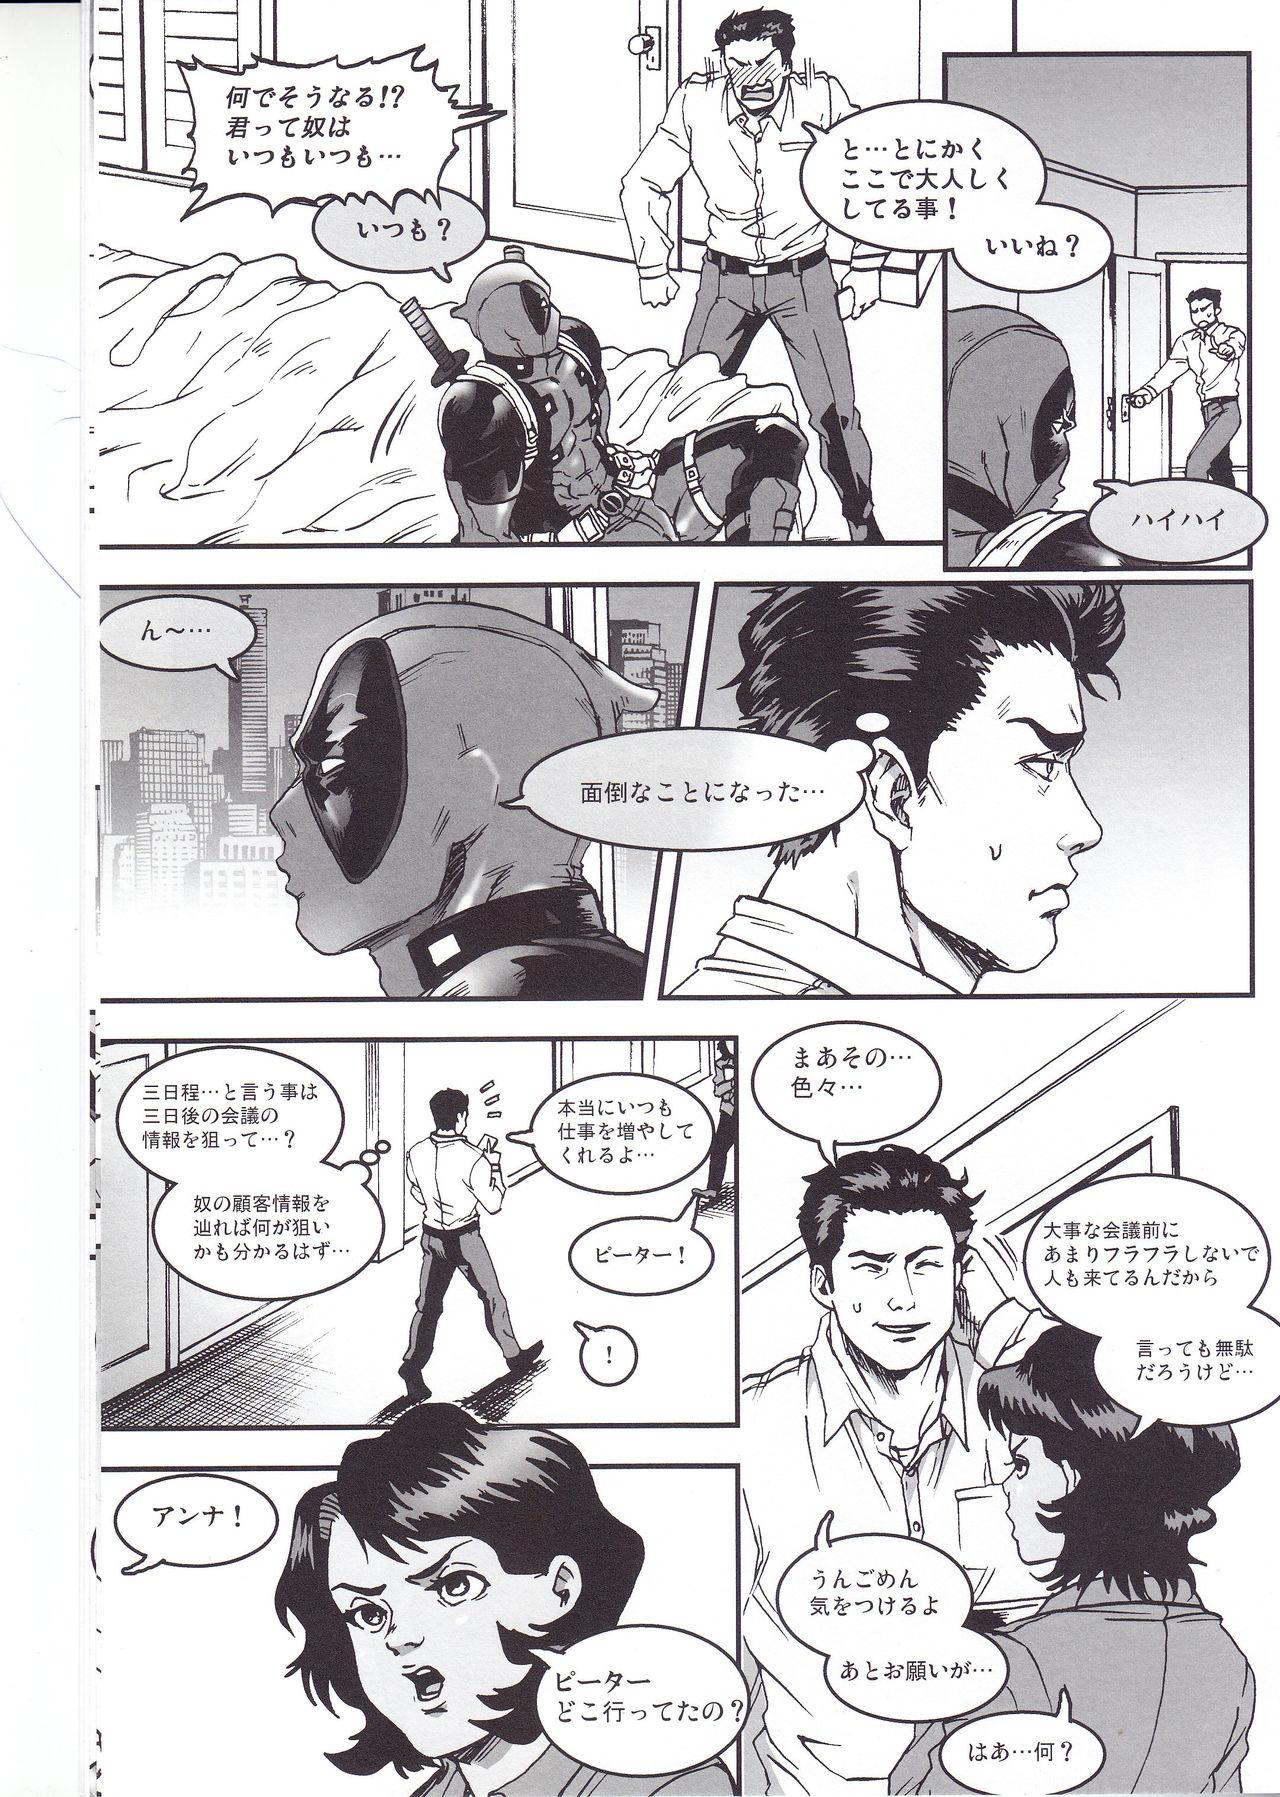 Pain THREE DAYS 1 - Spider-man Deadpool Submissive - Page 9